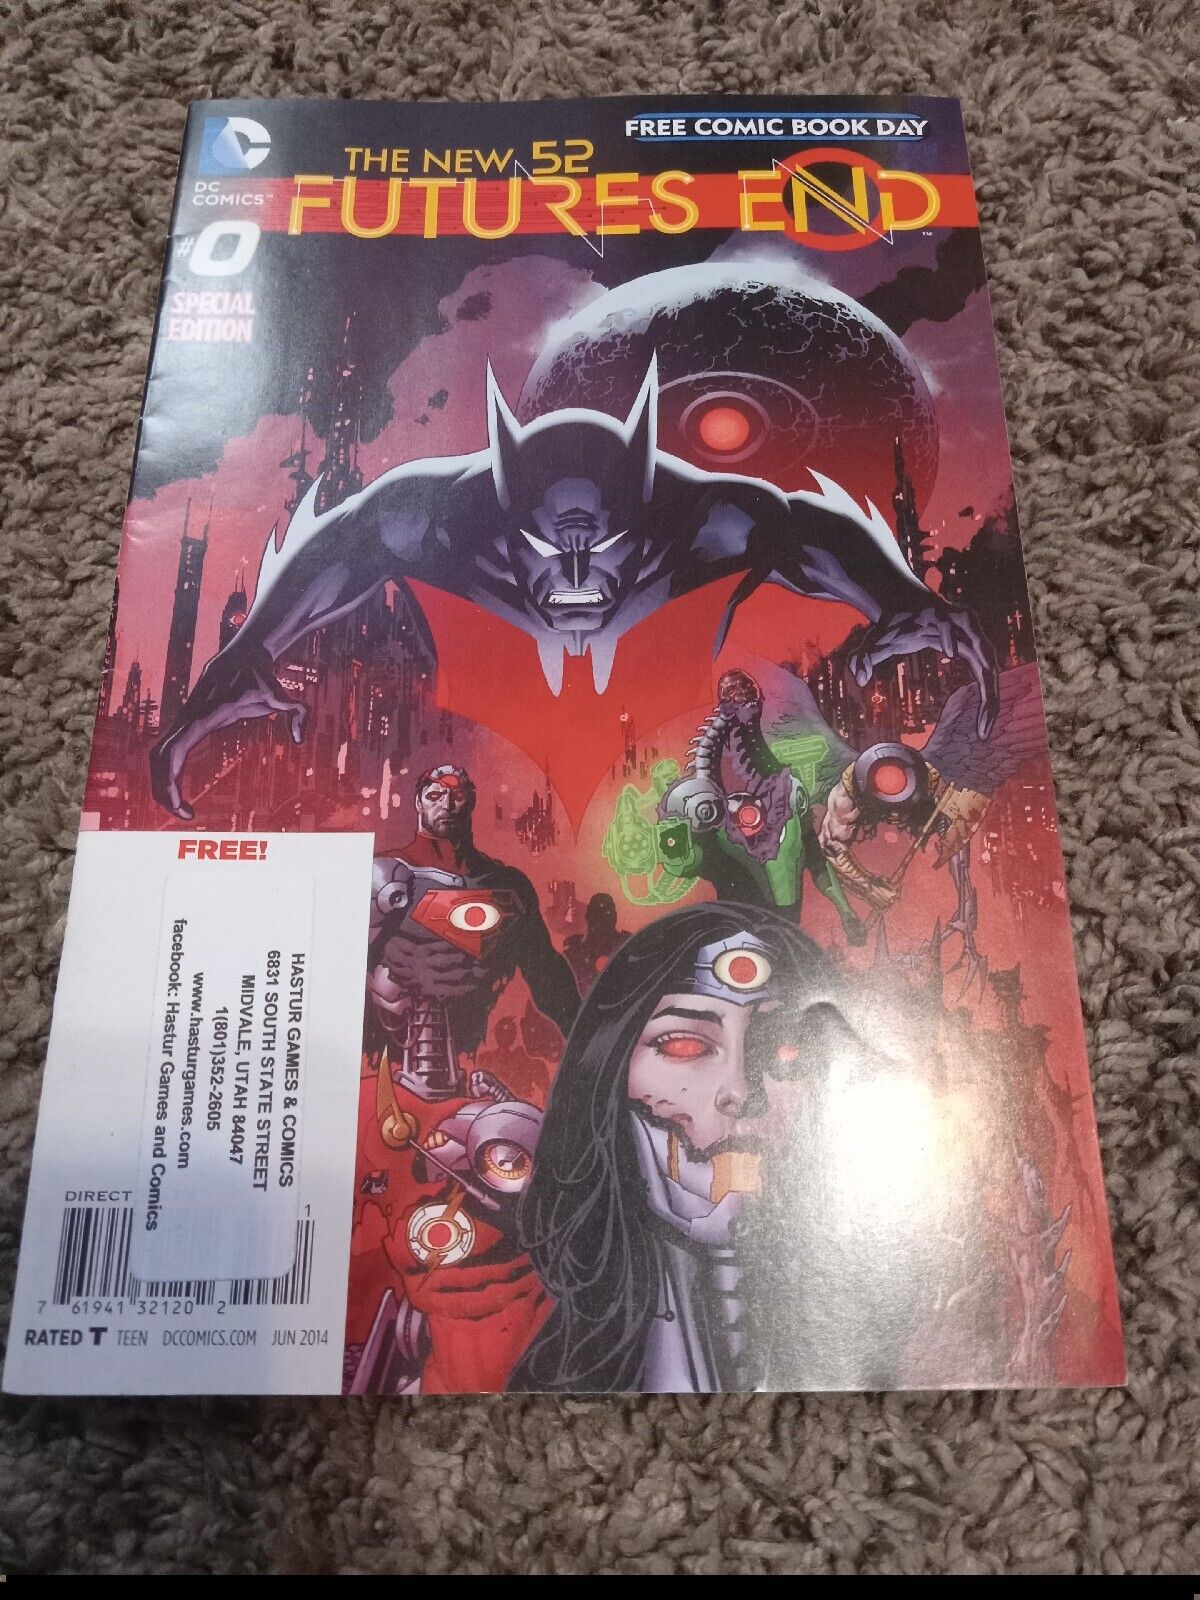 2014 FCBD DC The New 52 Futures End #0 Special Edition Free Comic Book Day